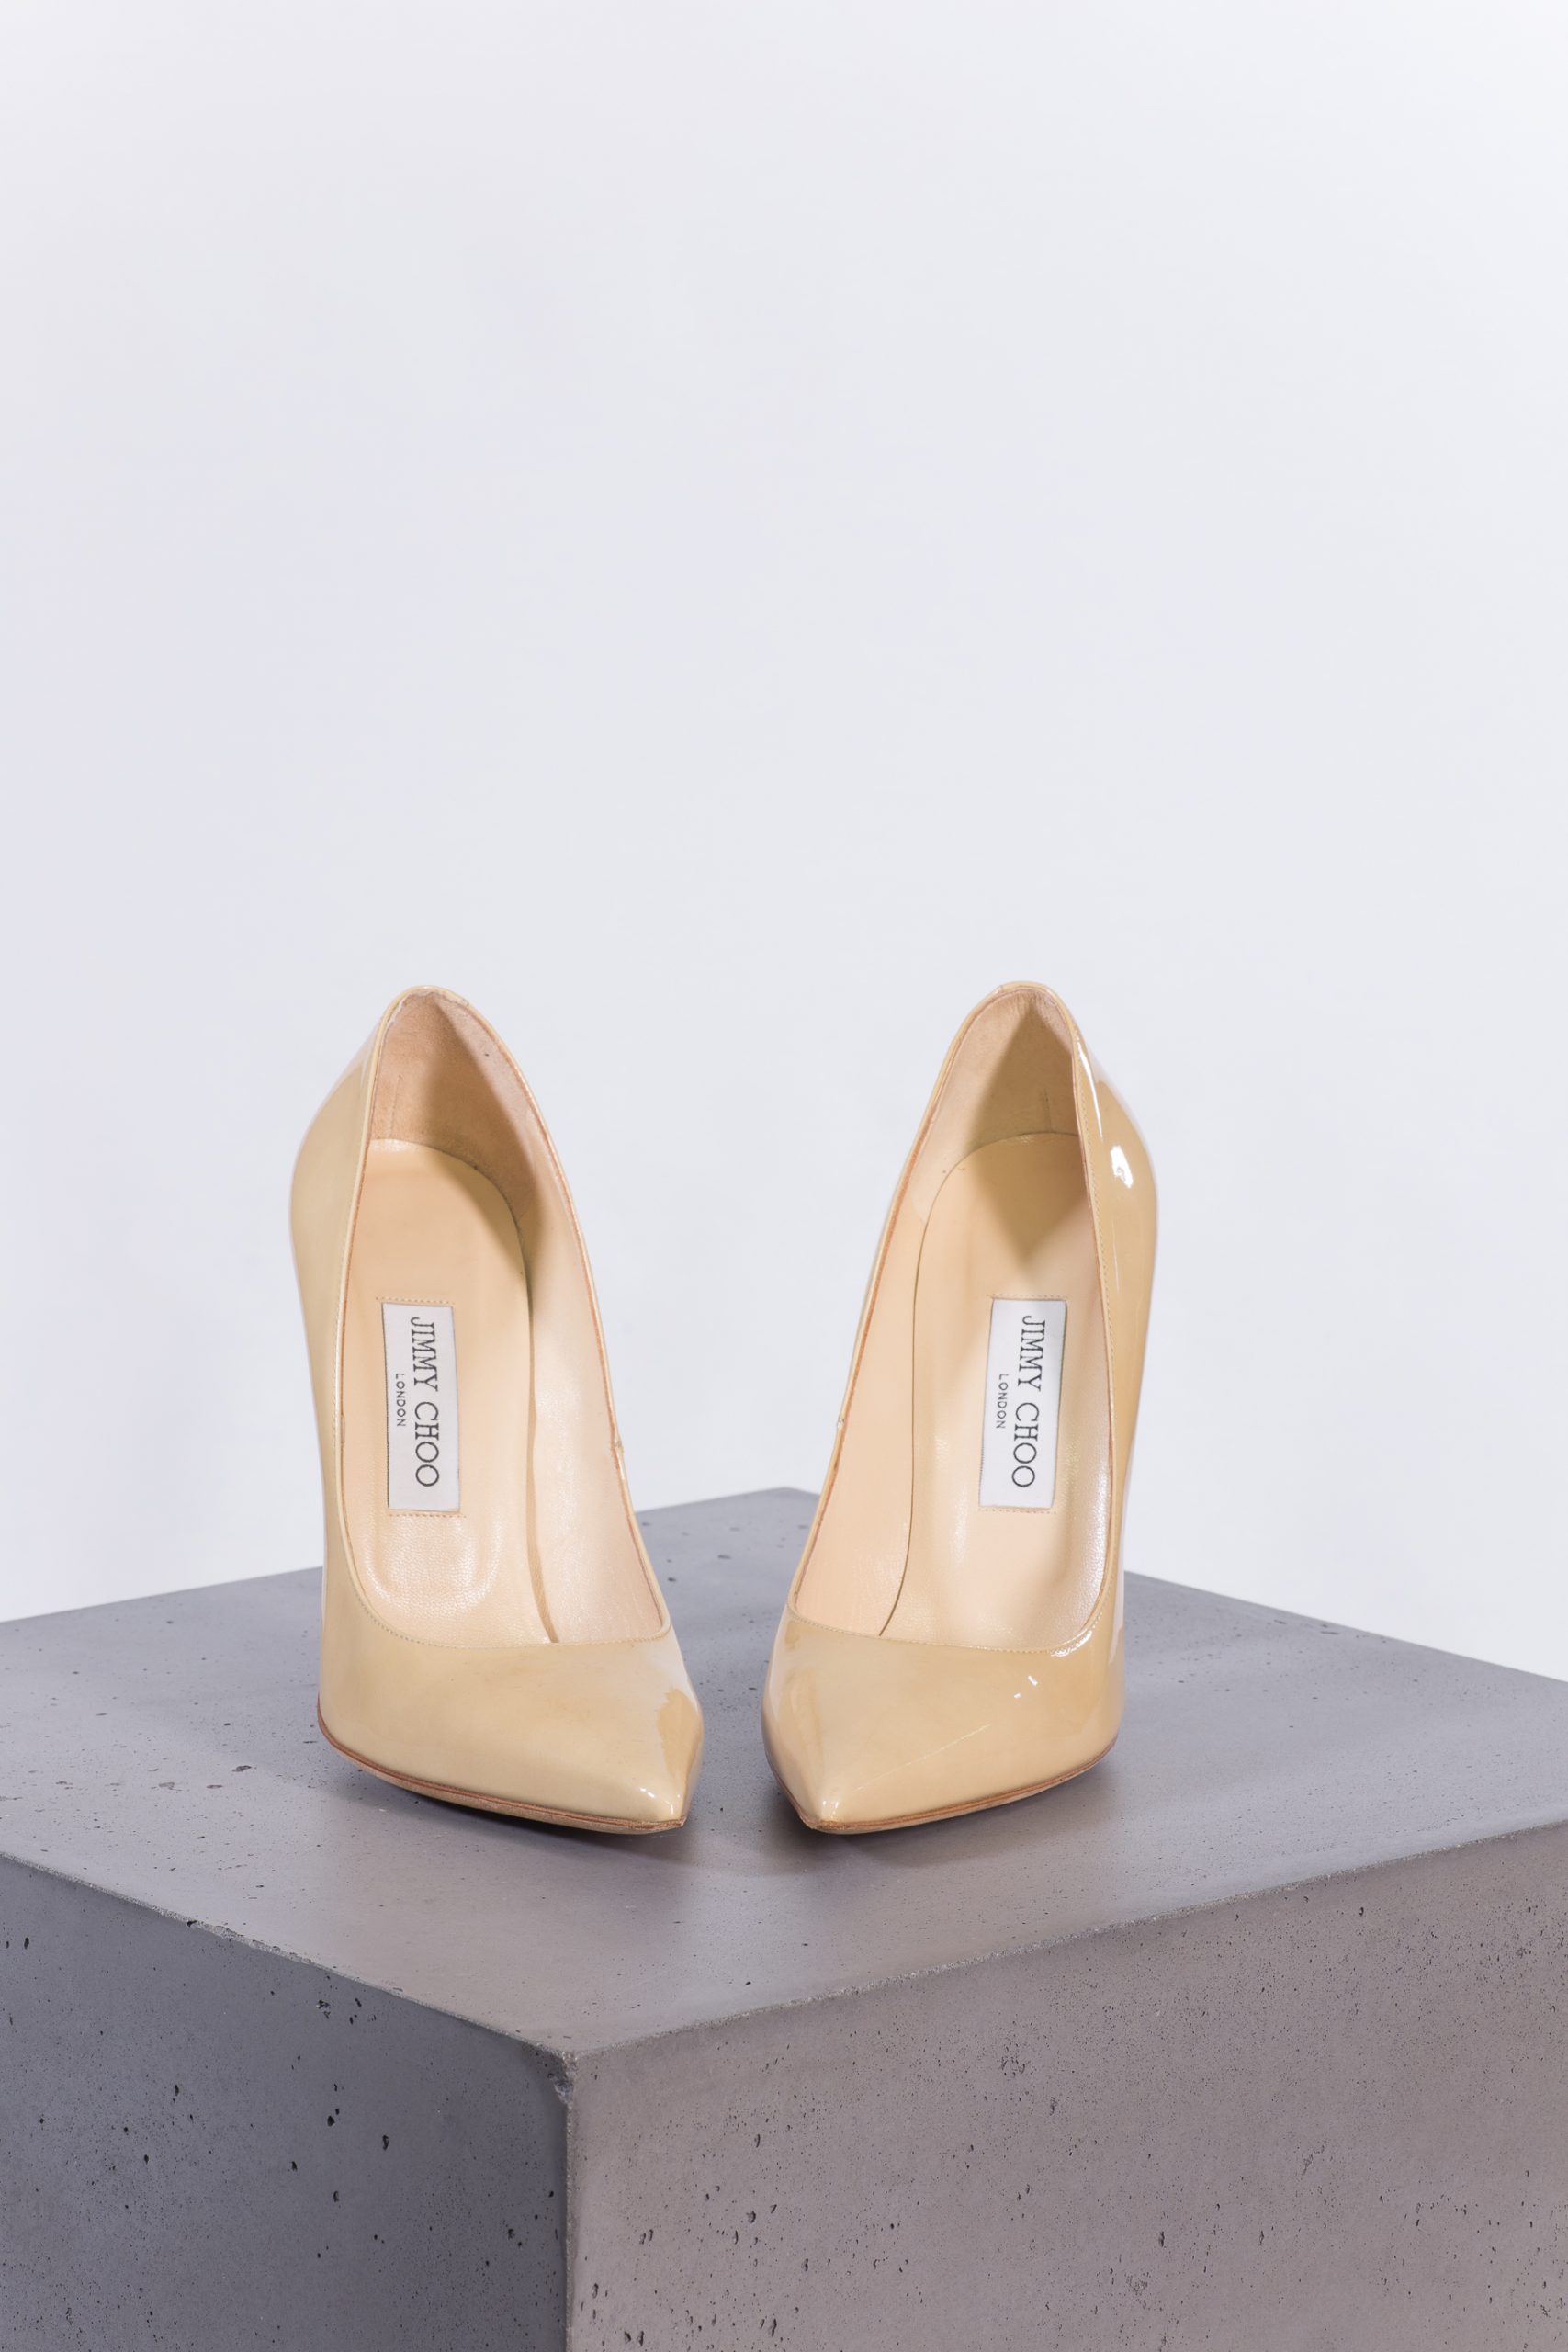 Jimmy Choo Shoes, 39.5 - Huntessa Luxury Online Consignment Boutique